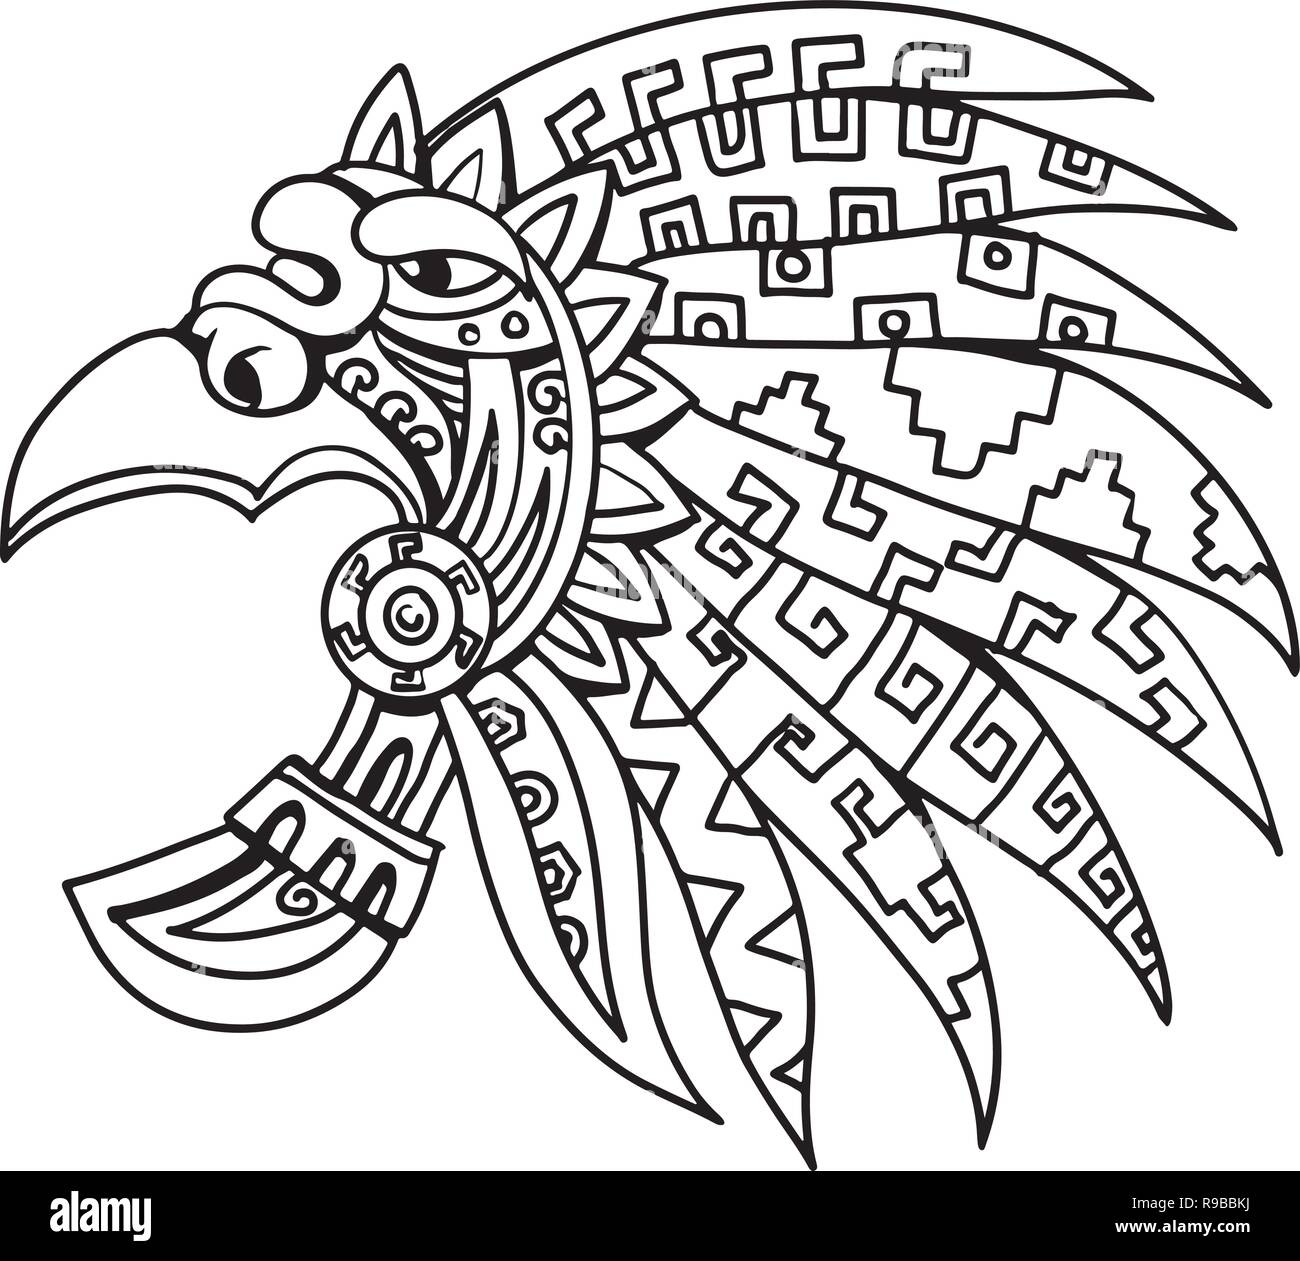 Made a Taqila logo with inspiration from Aztec drawings and a chicken The  style is modern and minimalistic  rlogodesign